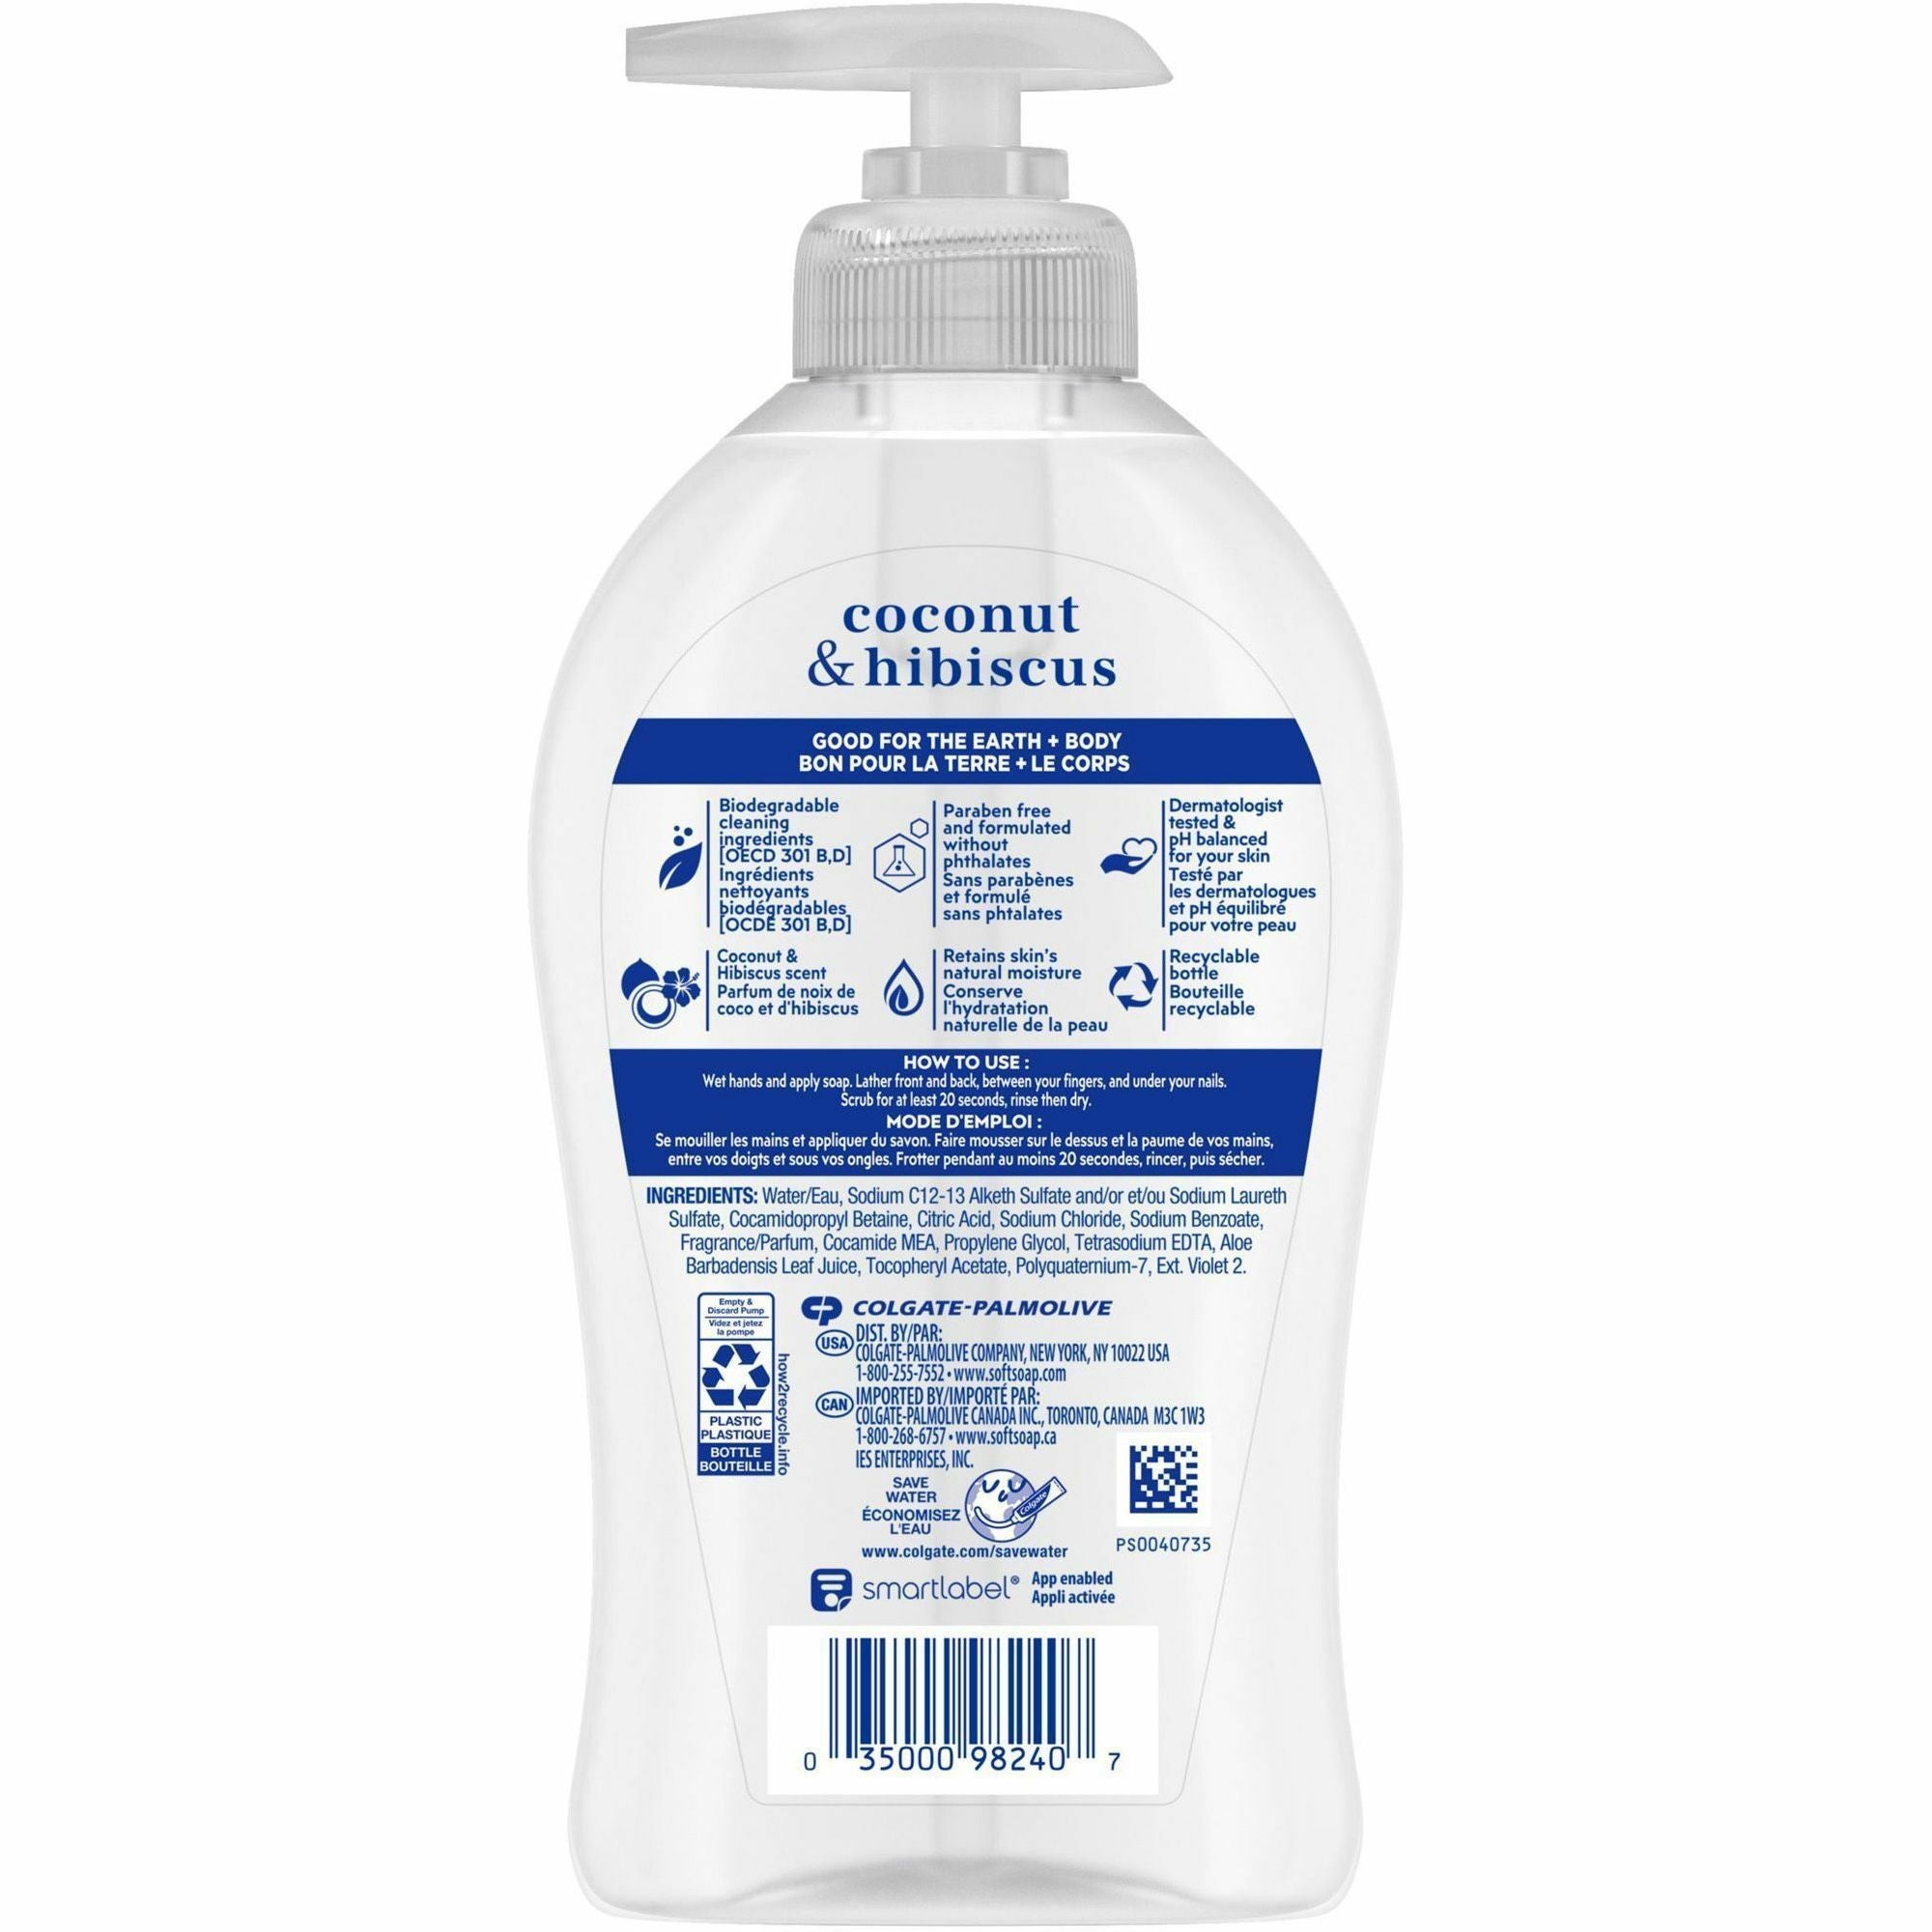 softsoap-coconut-hand-soap-coconut-&-hibiscus-scentfor-113-fl-oz-3327-ml-pump-bottle-dispenser-bacteria-remover-dirt-remover-hand-skin-moisturizing-refillable-recyclable-paraben-free-phthalate-free-biodegradable-1-each_cpcus07157a - 3